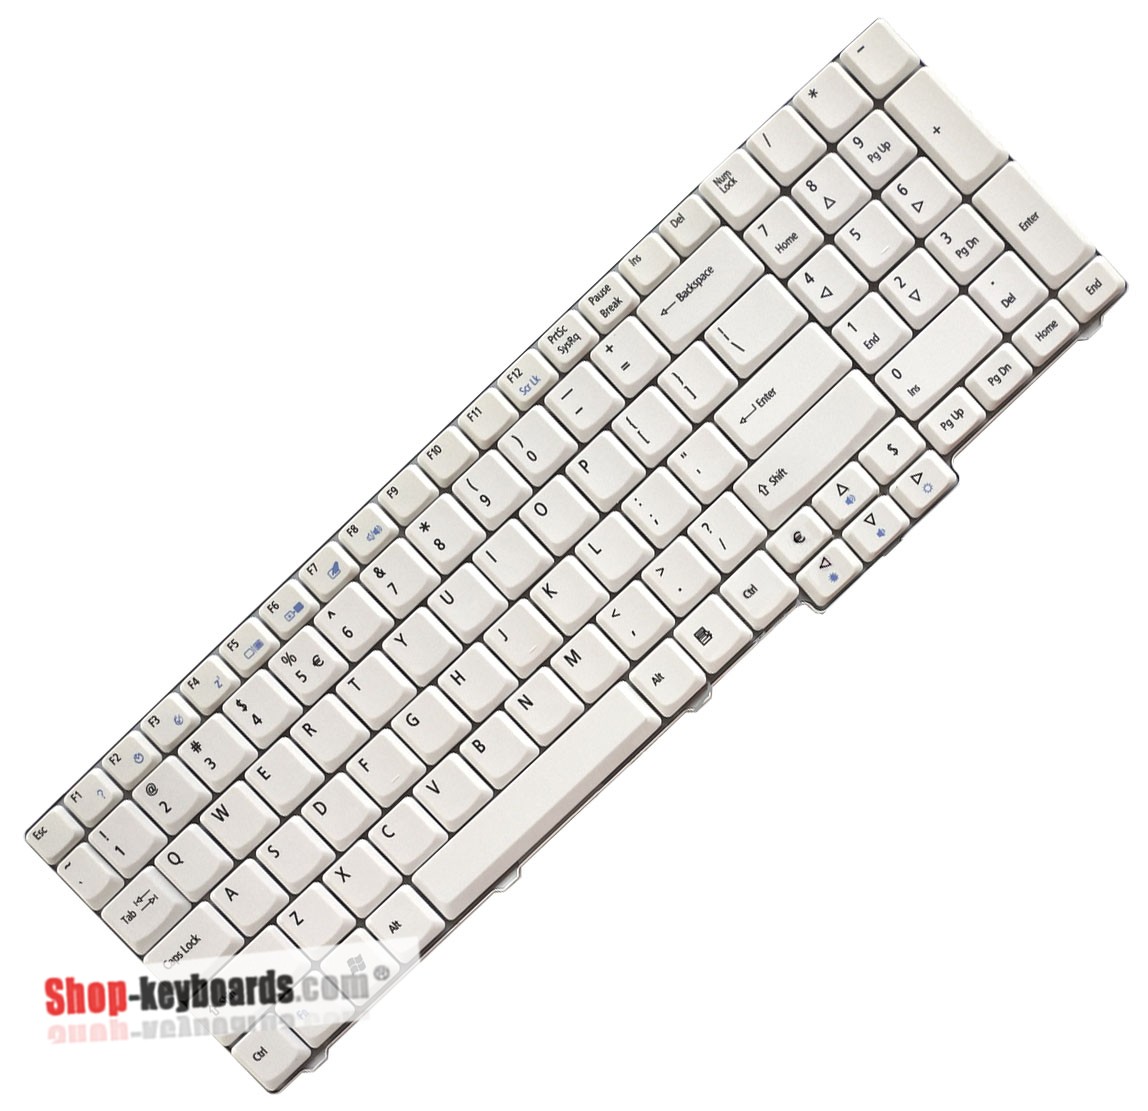 Acer Aspire 8530 Keyboard replacement